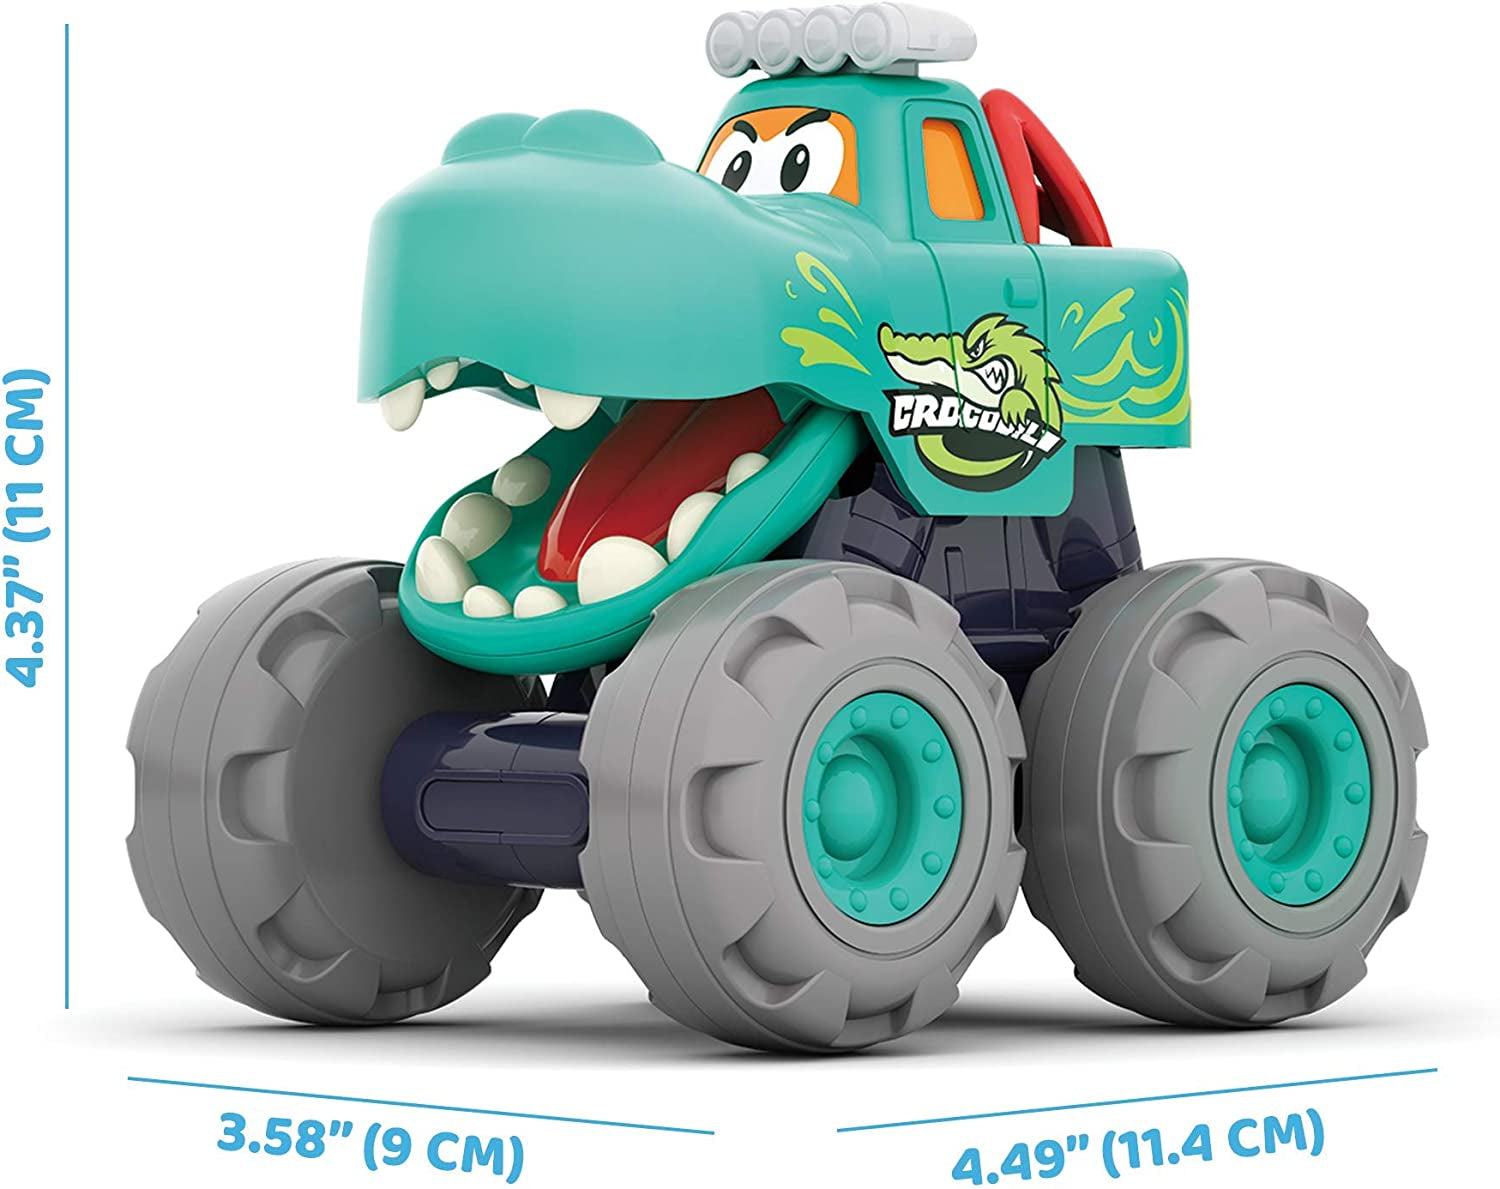 Toy Car for 1 2 3 Year Old 1 Pack Crocodile Truck Toy Push with Friction Powered Bull Car Pull Back Leopard Car Big Wheel Animal Toy Car Baby Toy Gift for 12 18 Month Boys Girls